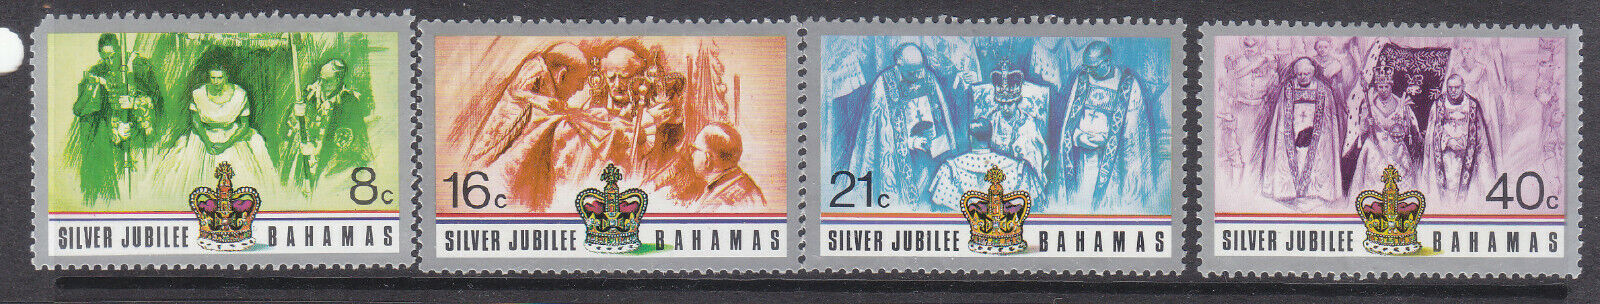 Bahamas1977 SilverJubilee set OFFicial mail order mint Max 54% OFF no gum